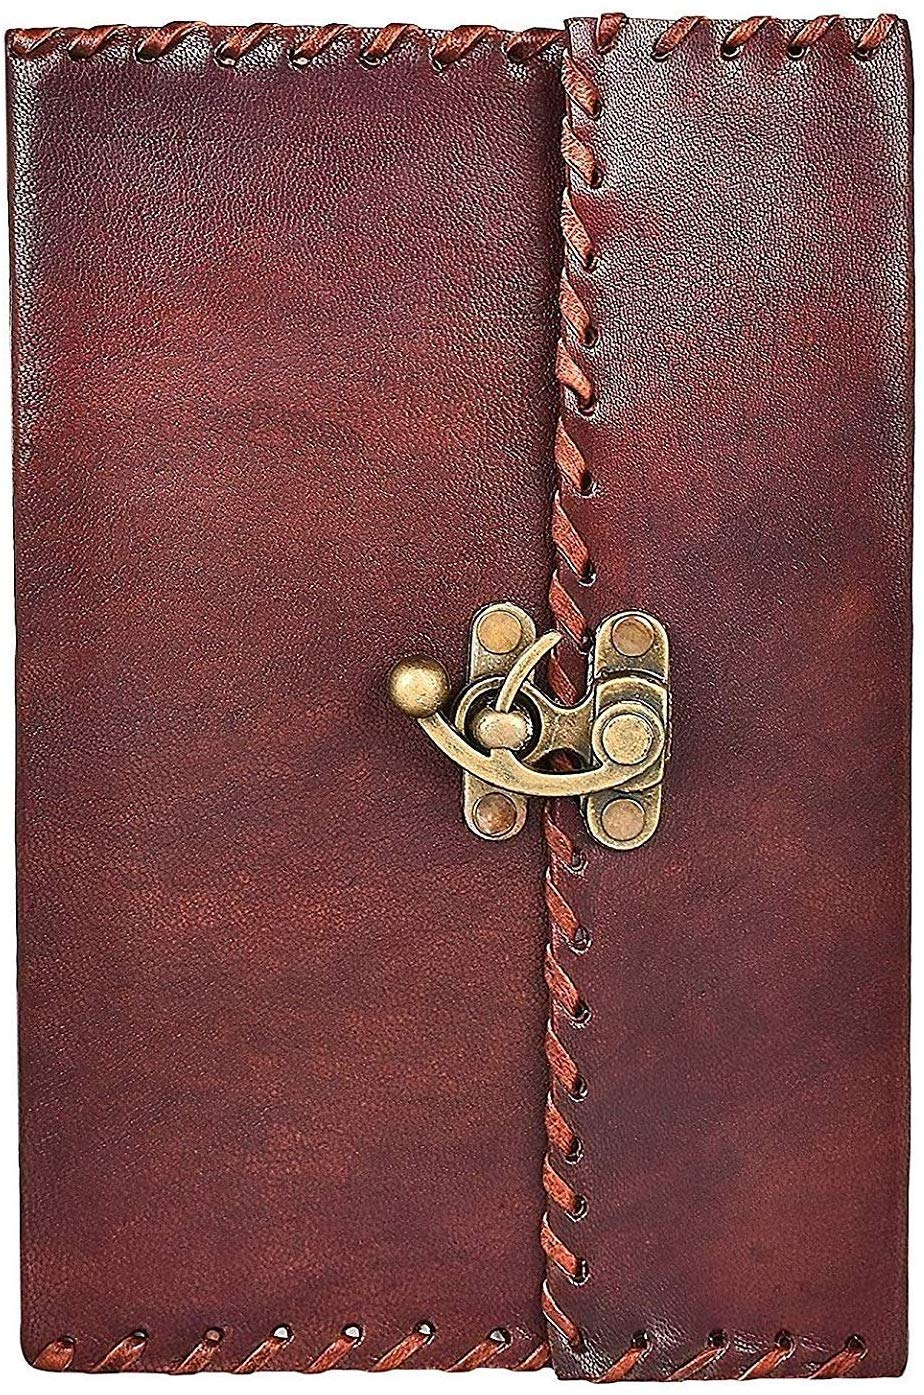 Real Vintage Hunter Leather Handmade Paper Notebook Diary with Brass Lock